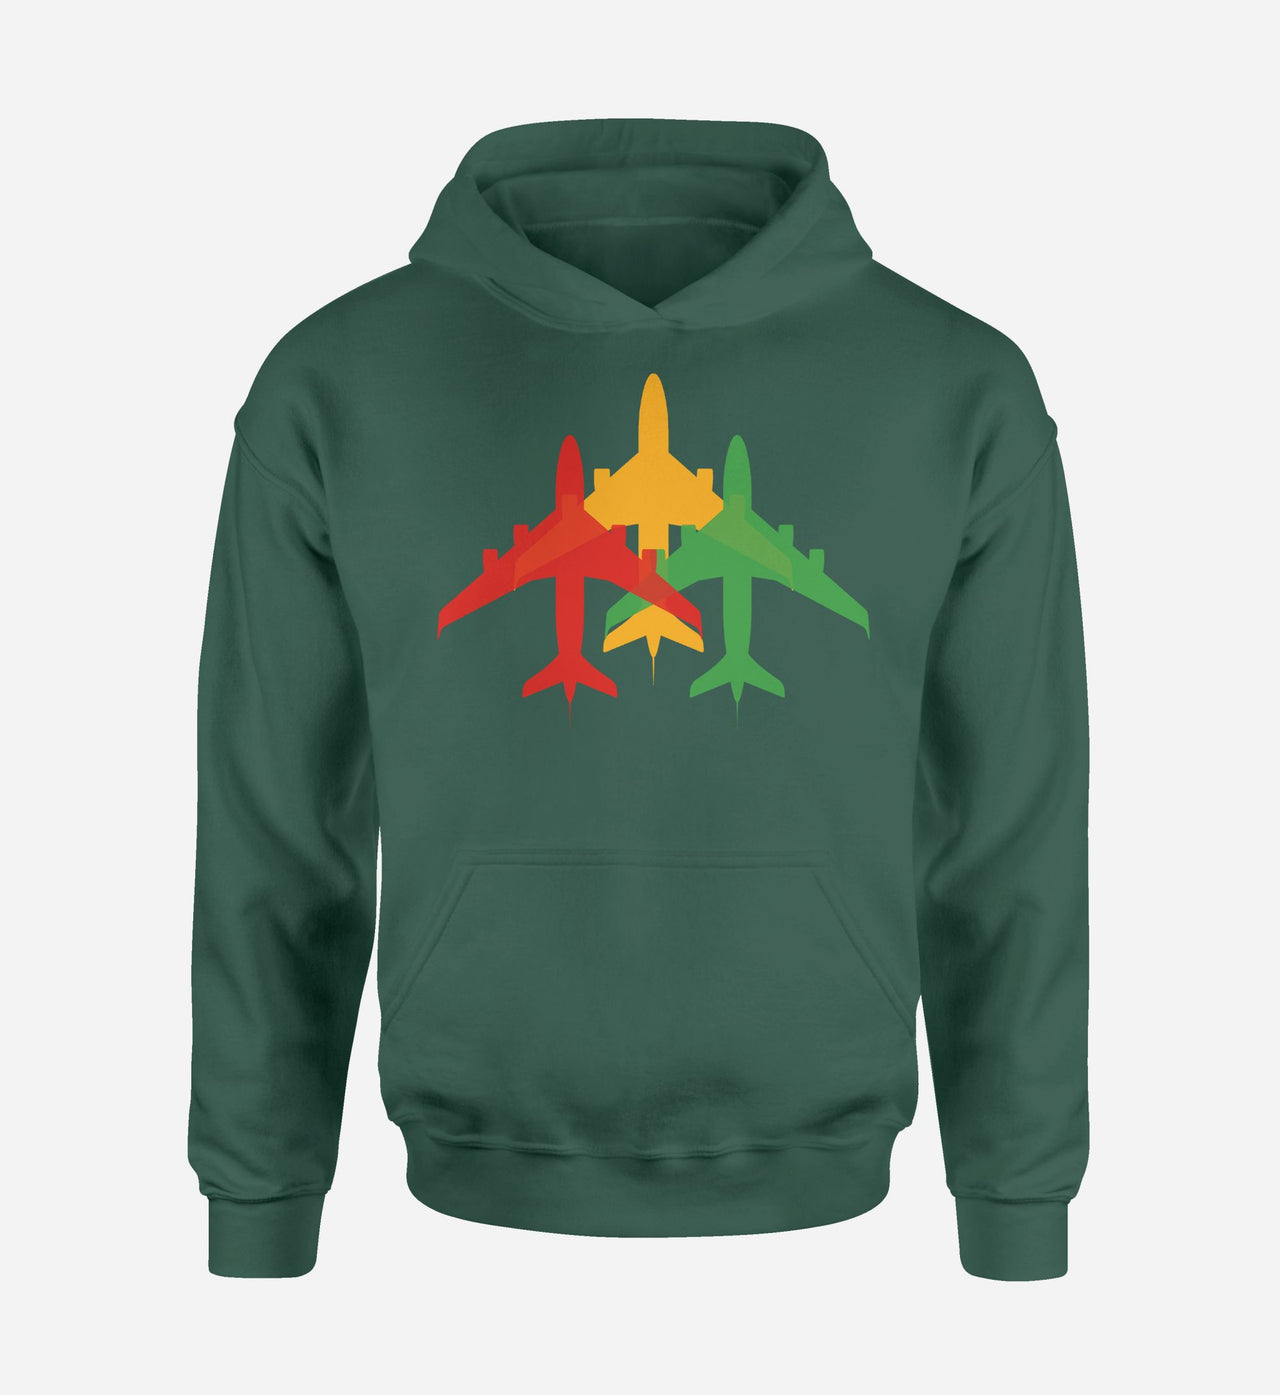 Colourful 3 Airplanes Designed Hoodies